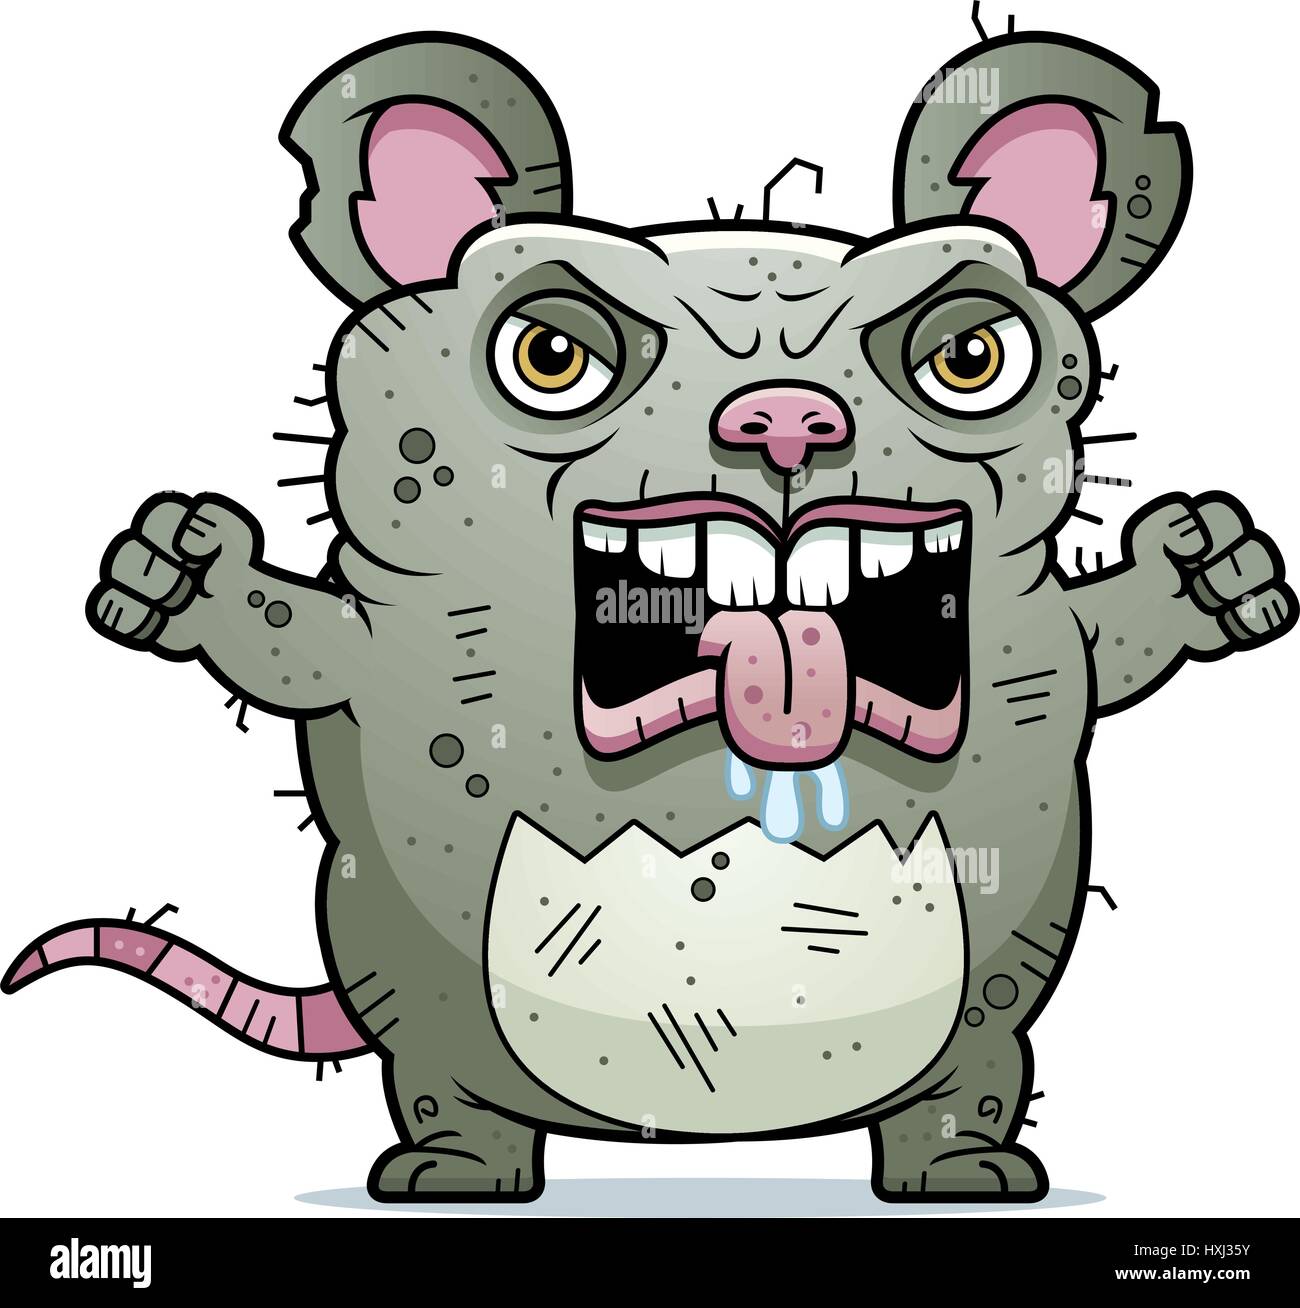 A cartoon illustration of an ugly rat looking angry. Stock Vector